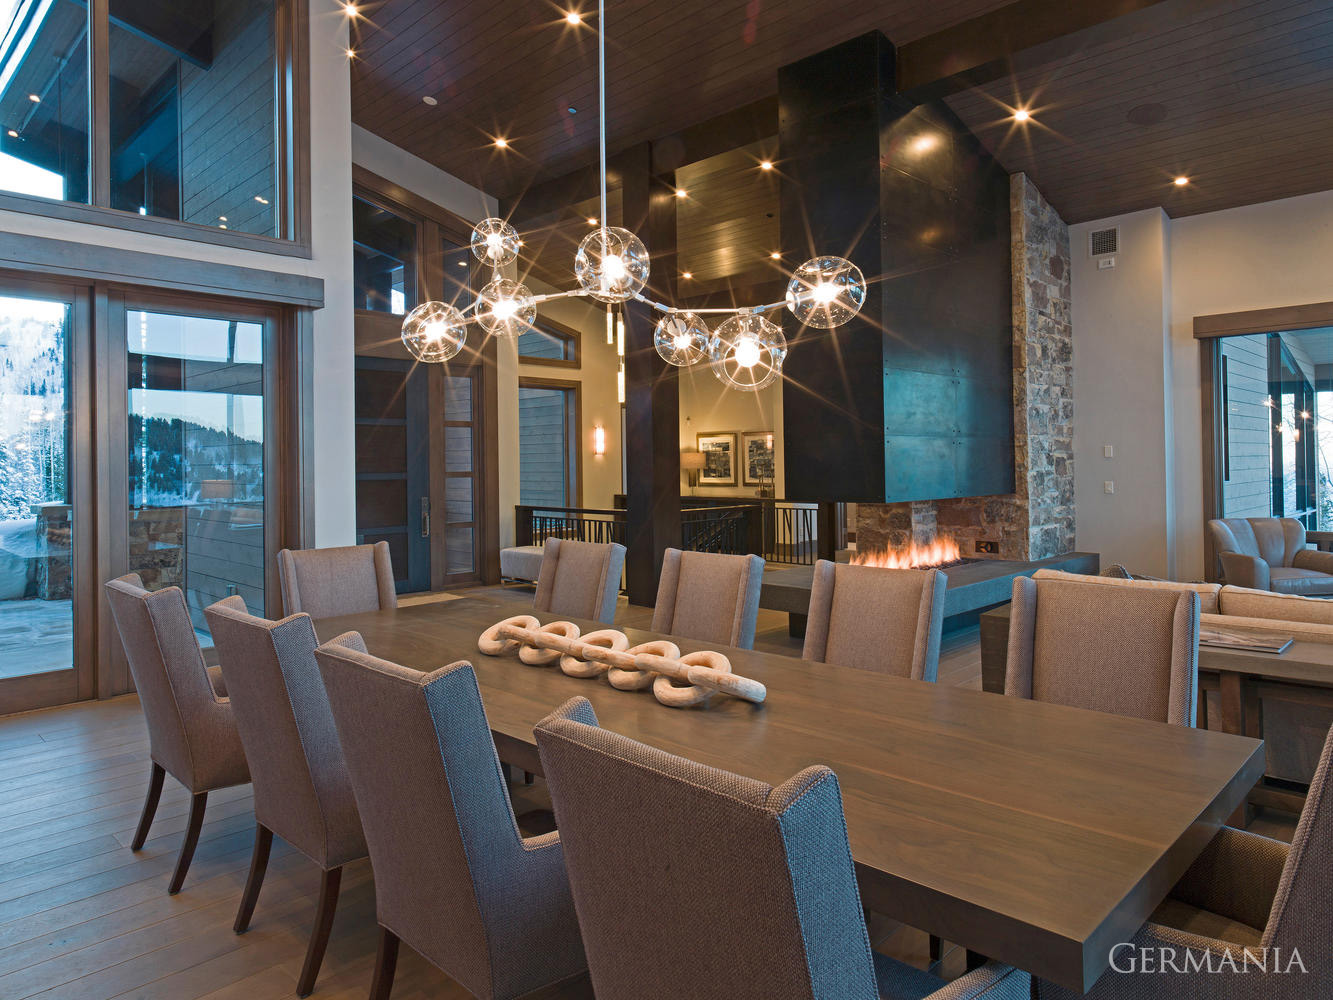 Wondering about building your own mansion dining room? Light fixtures and lighting cans can important elements for your custom luxury home.